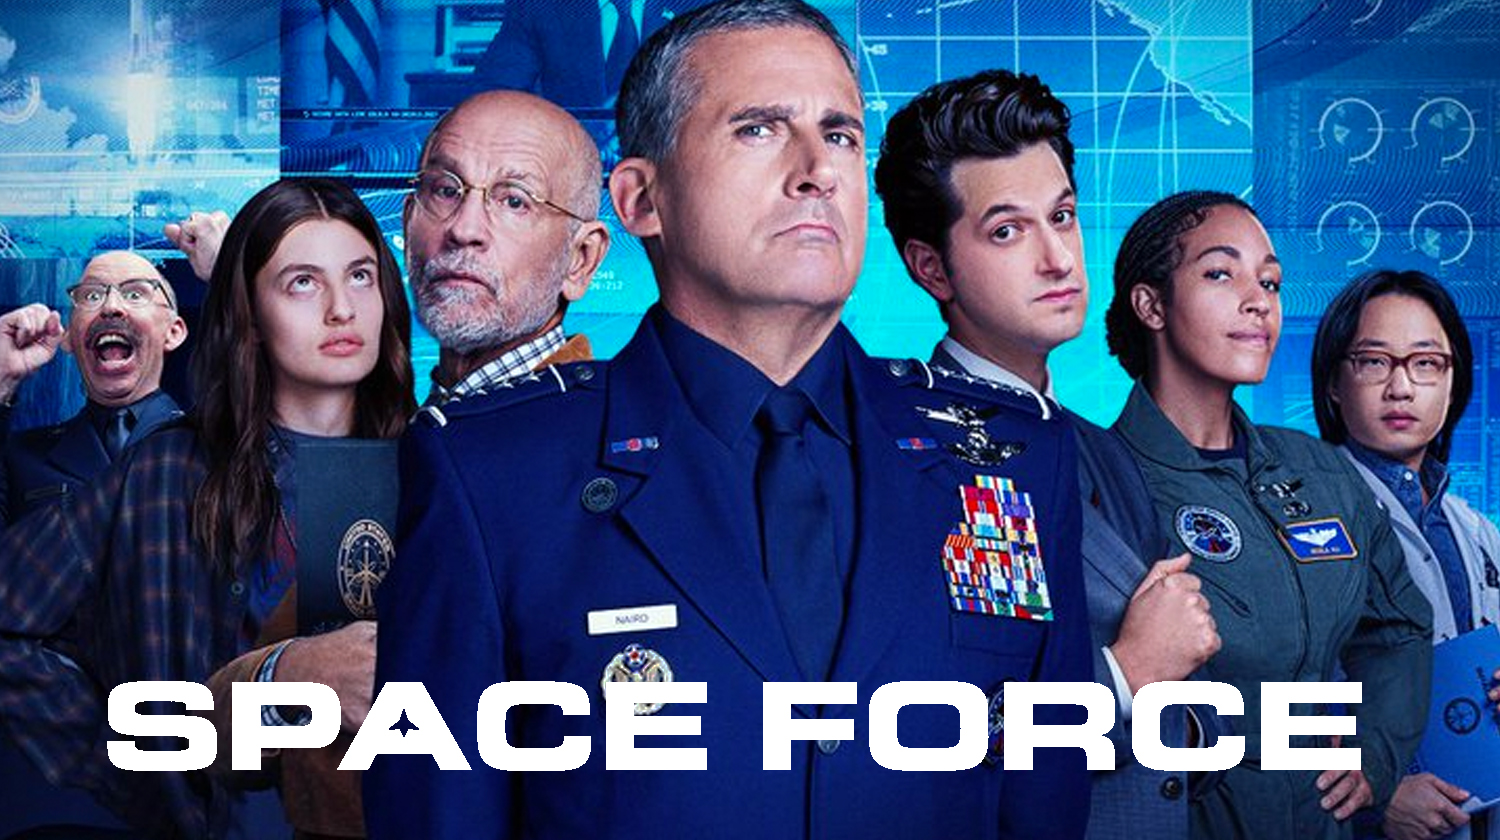 Space Force' Season 2 will land on Netflix in February | Space